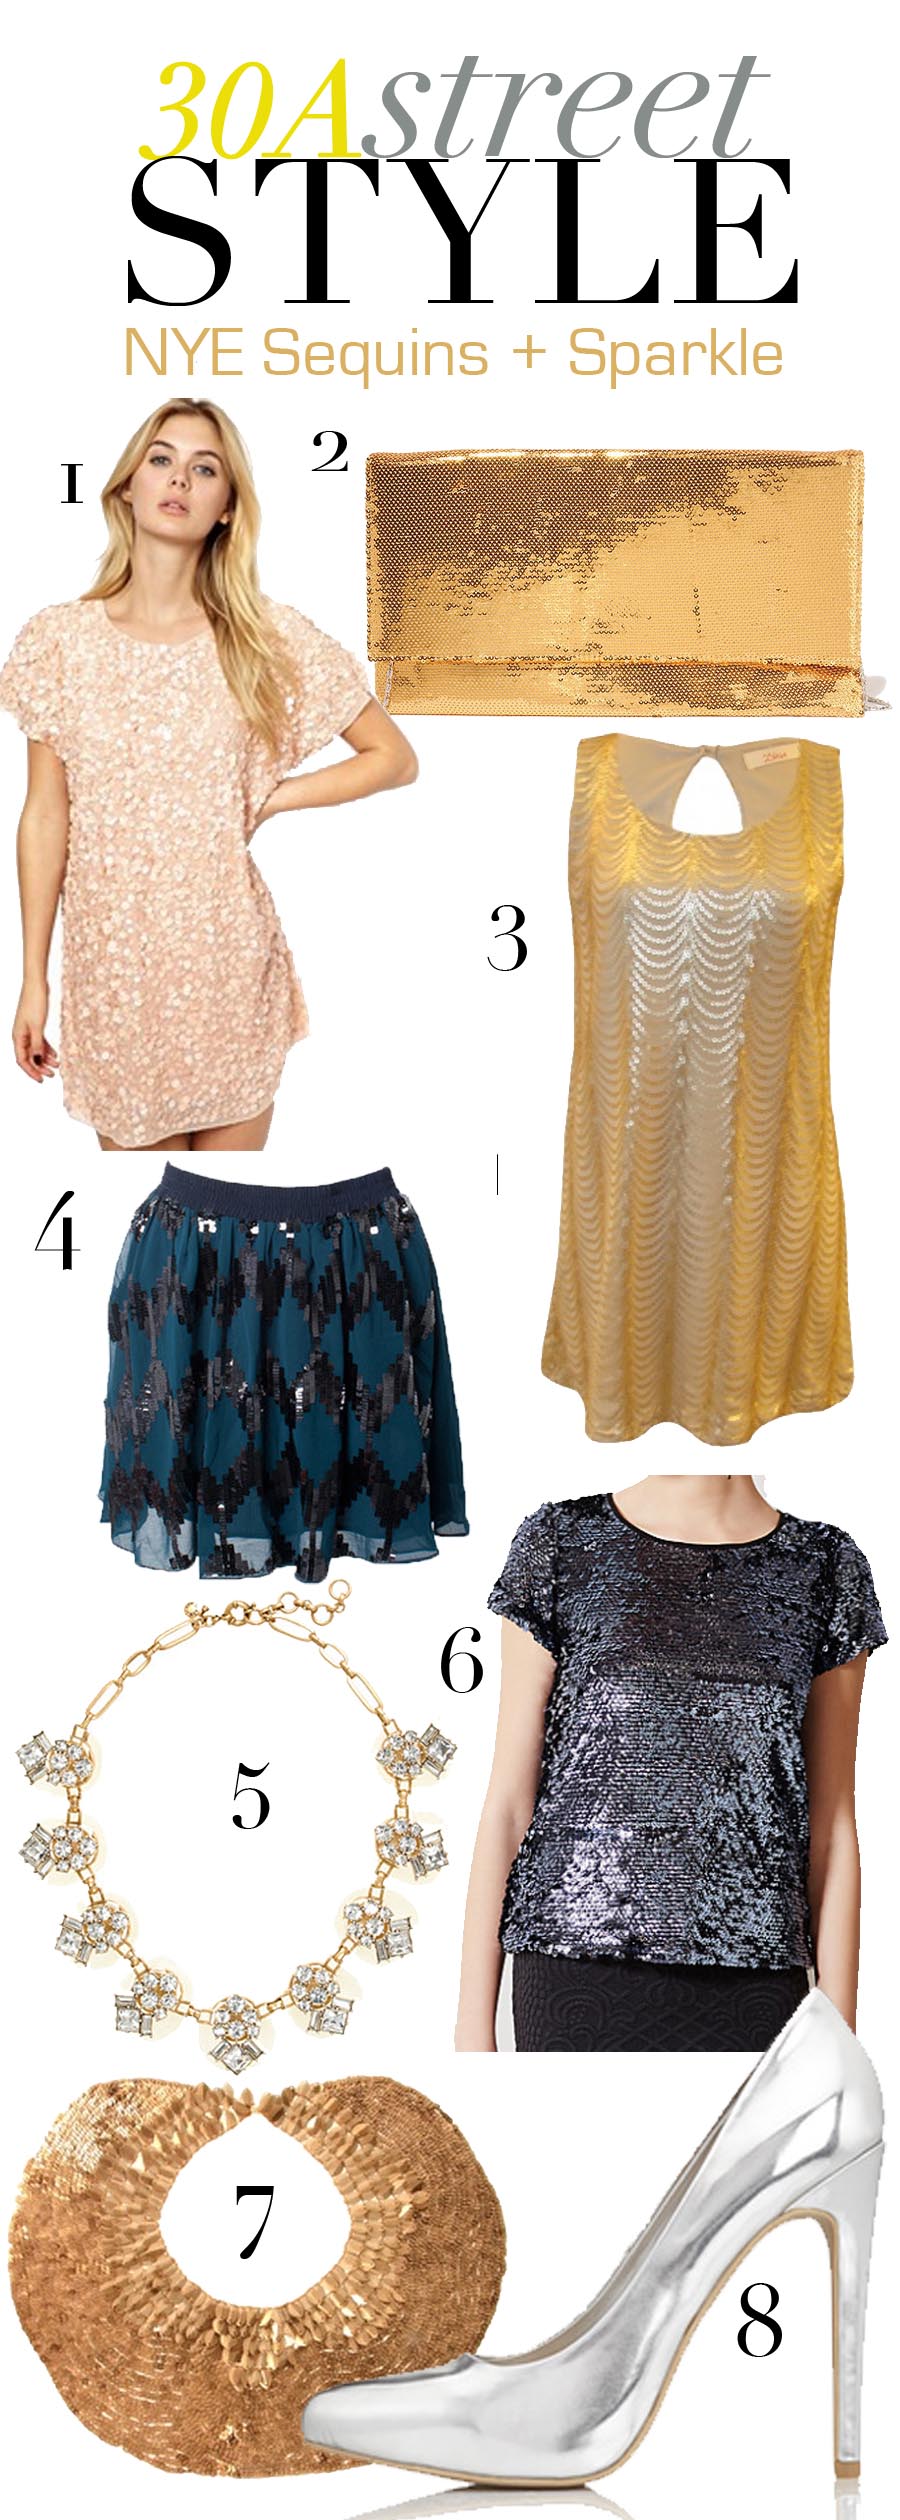 Style Guide: New Year’s Eve Sequins + Sparkle